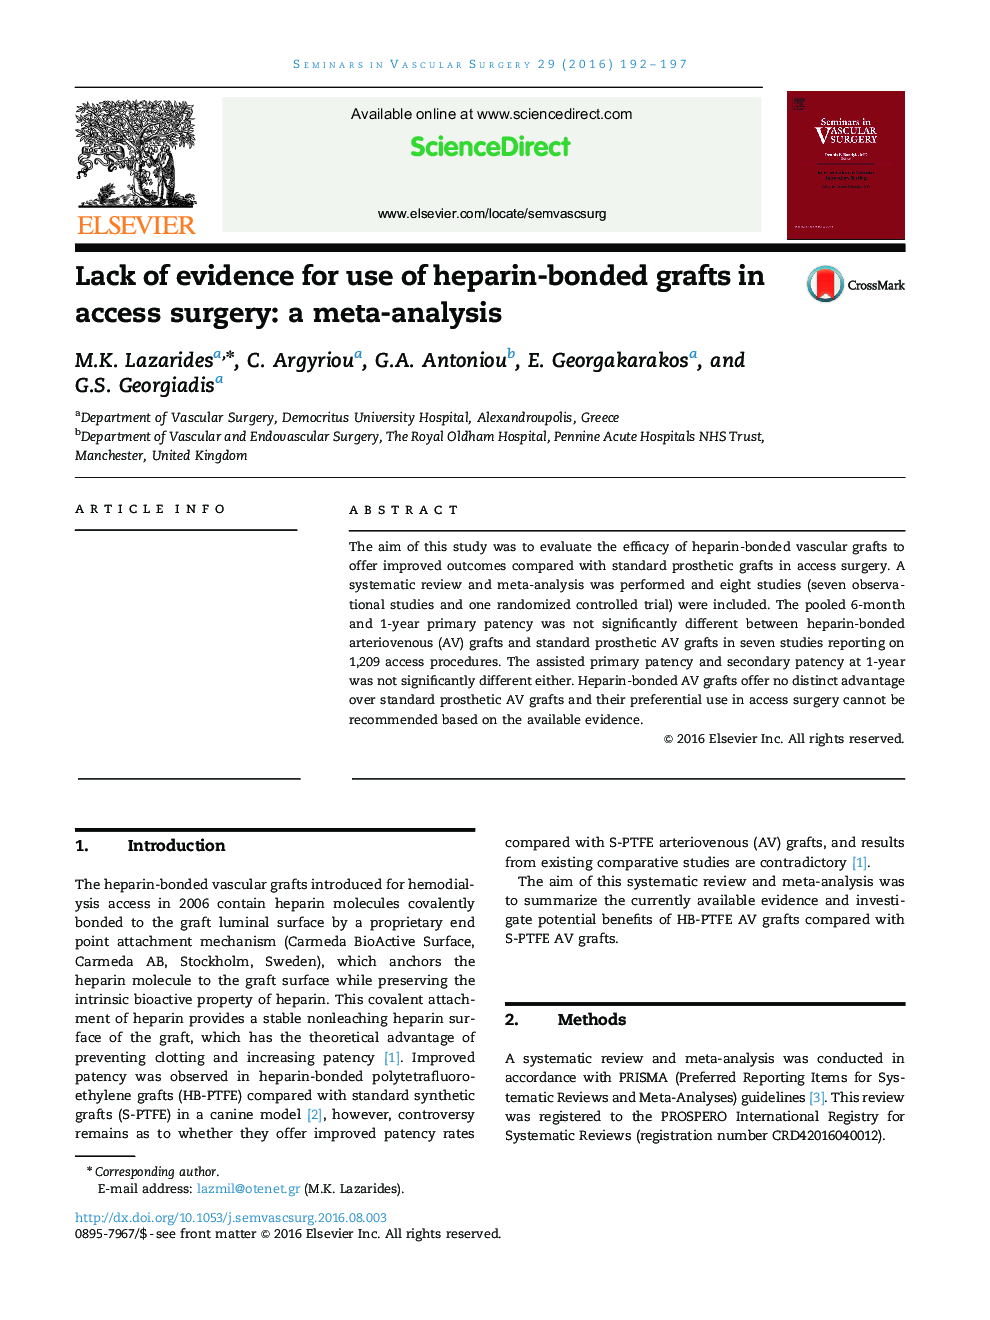 Lack of evidence for use of heparin-bonded grafts in access surgery: a meta-analysis